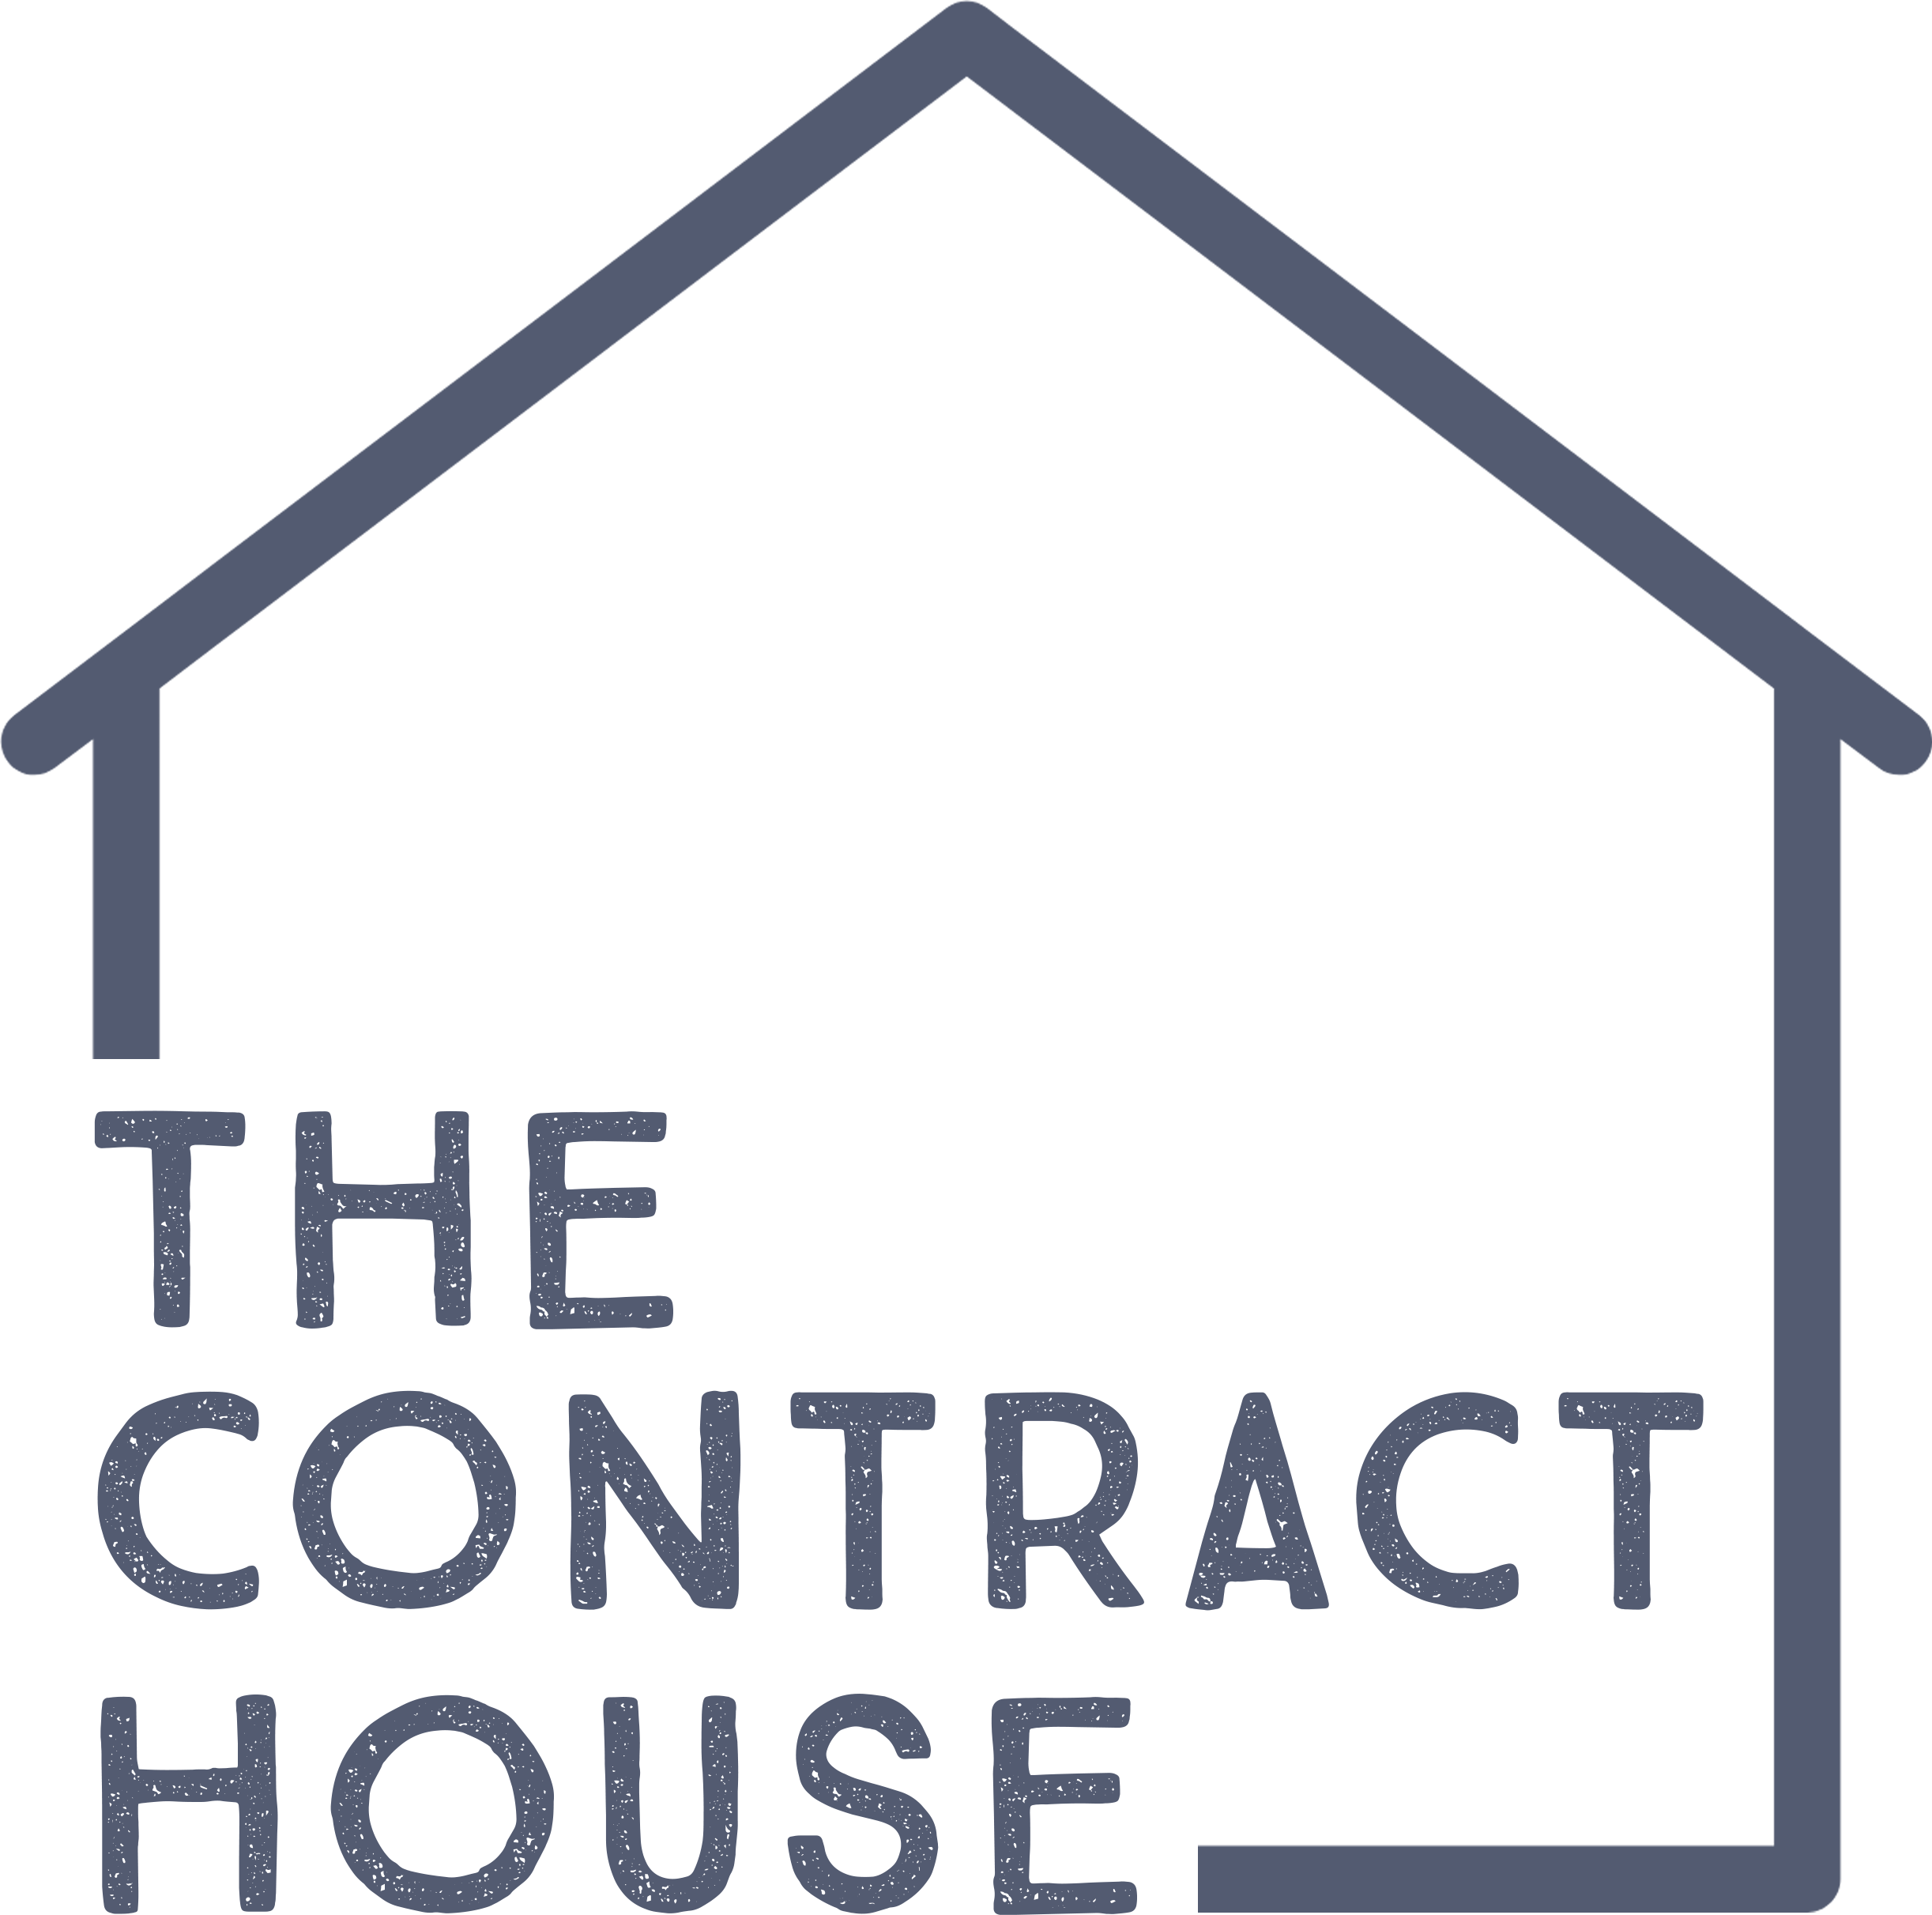 About The Contract House